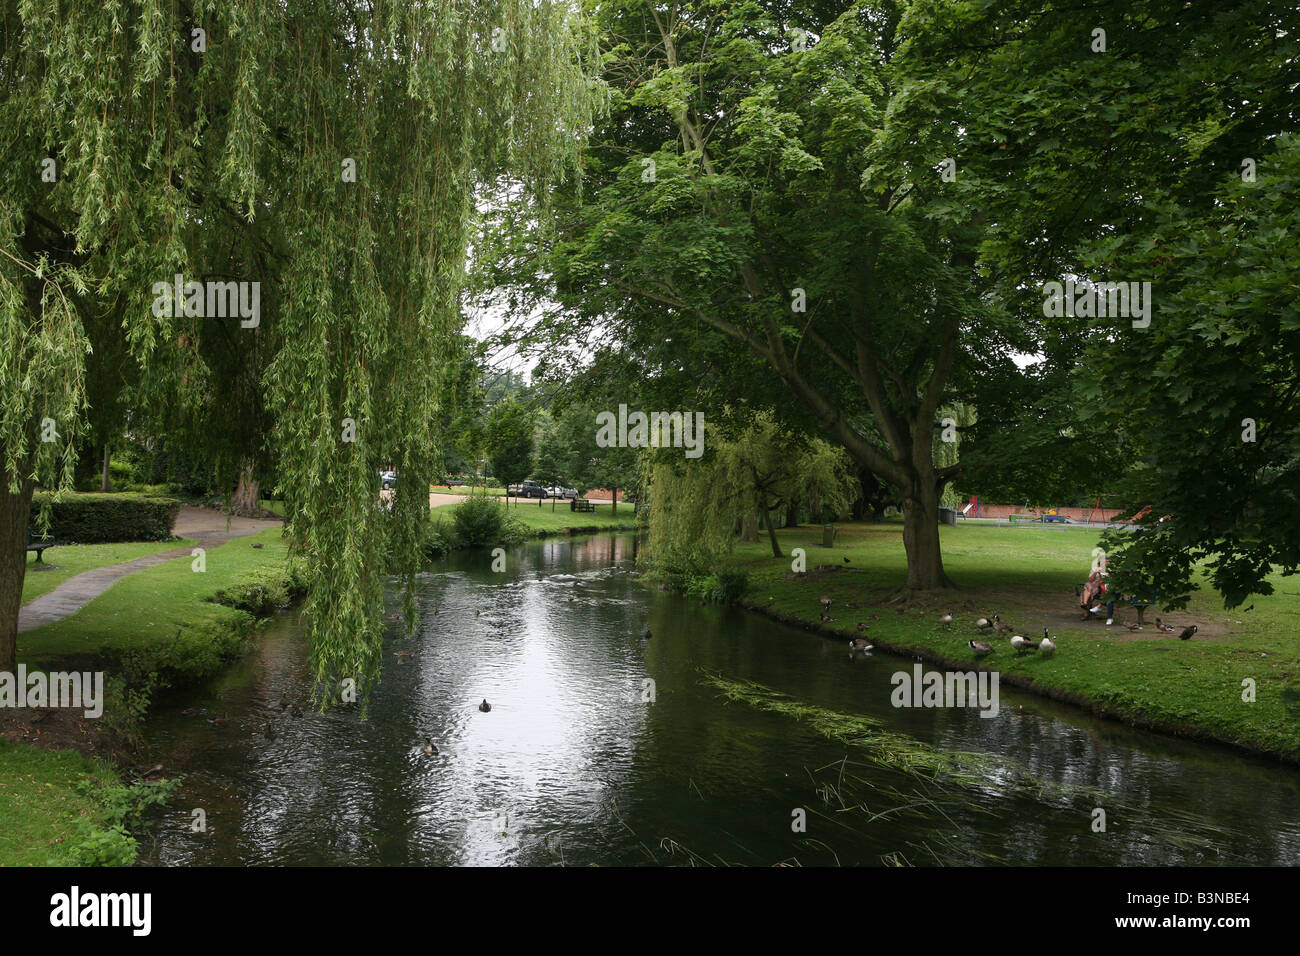 a landscape photo of a quintessential british park with weeping willows and a river running through the middle of it. Stock Photo